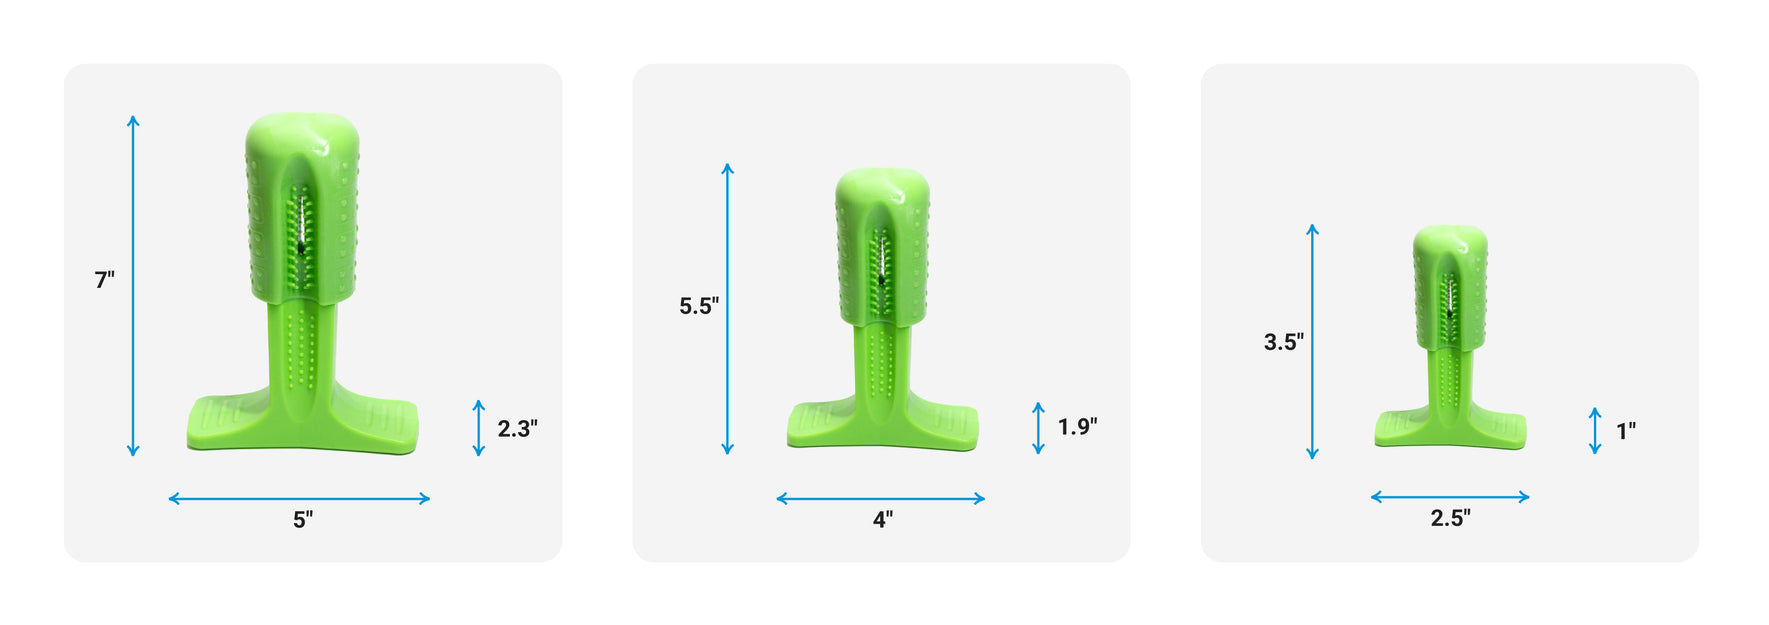 Dog Toothbrush Dimensions